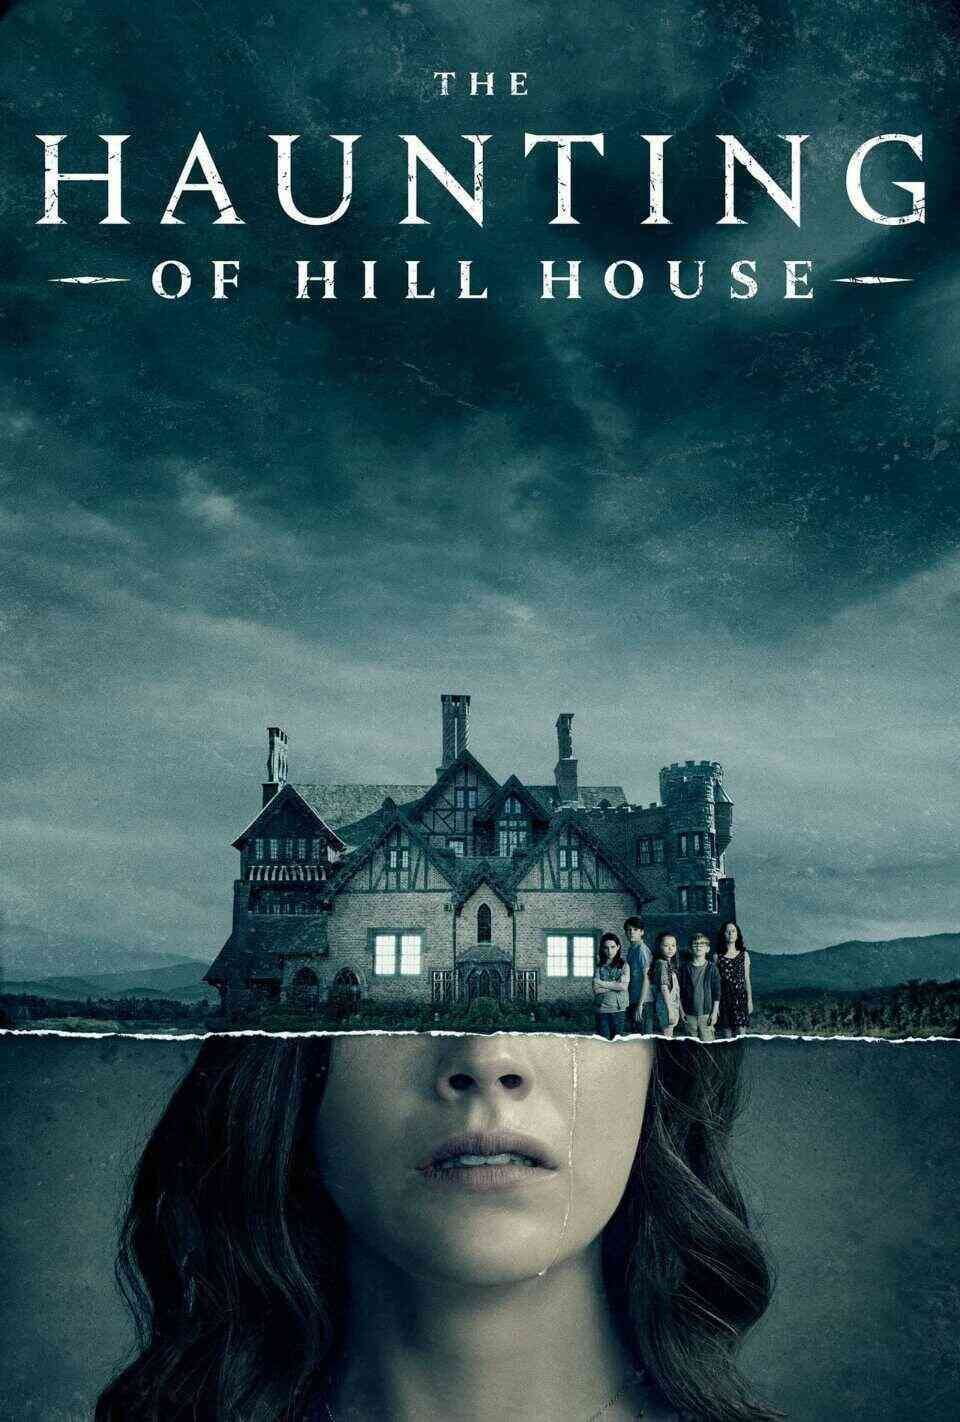 Read The Haunting of Hill House screenplay (poster)